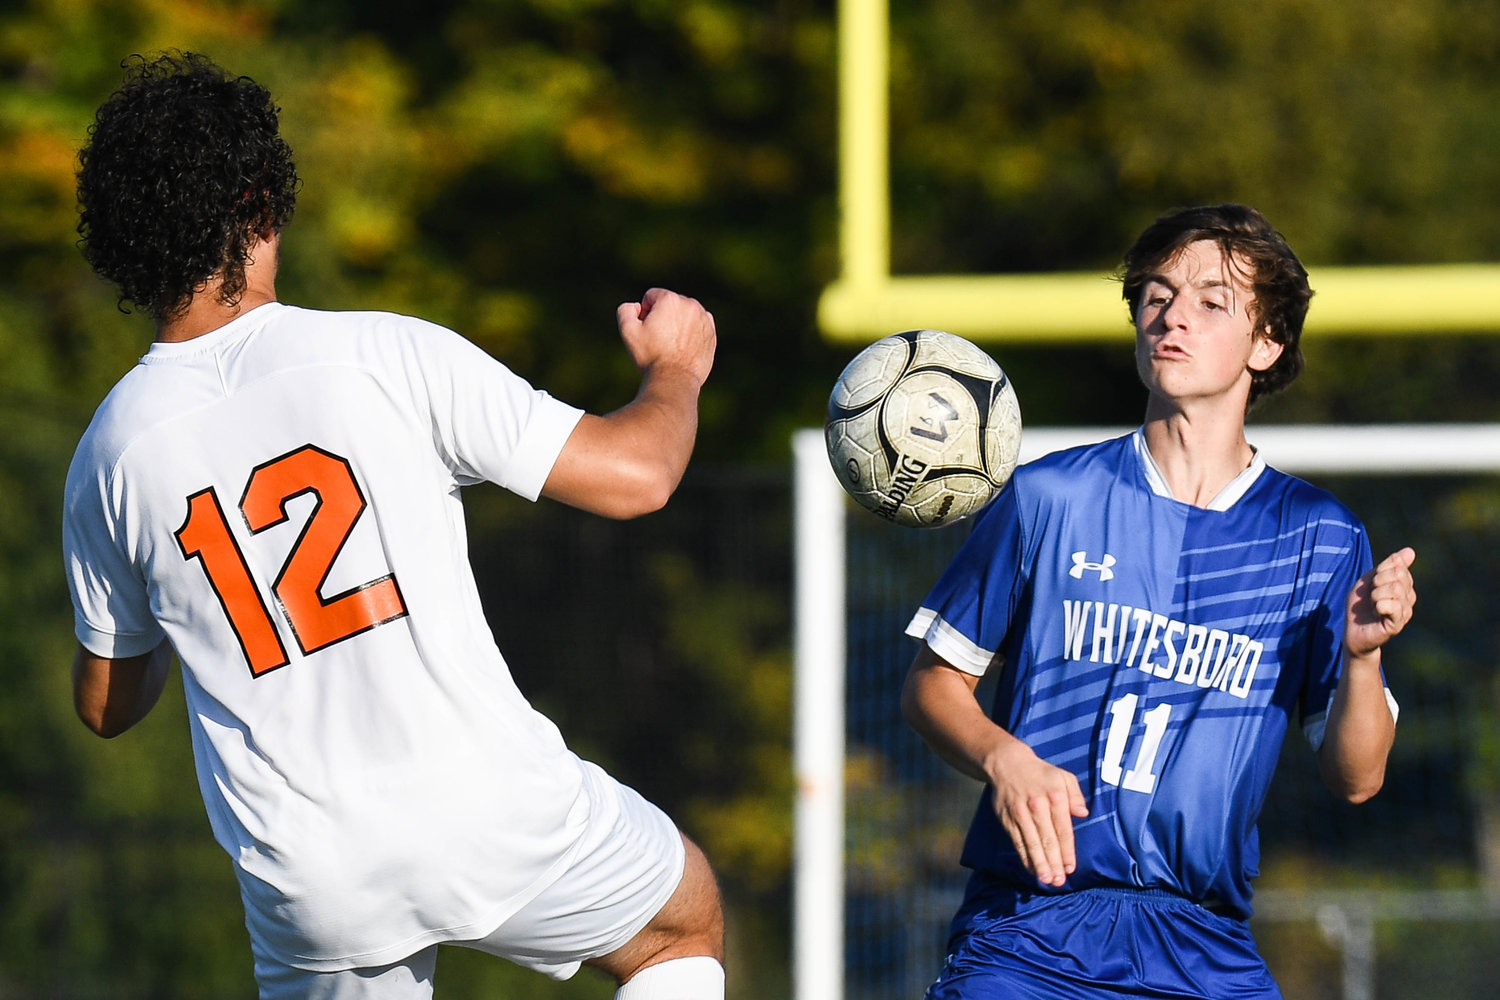 Rome Free Academy's Matthew McCormick, left, and Whitesboro's Daschel Smith both attempt to settle a loose ball in Tuesday's Tri-Valley League contest on Monday, Oct. 11 in Whitesboro. RFA won 3-1.